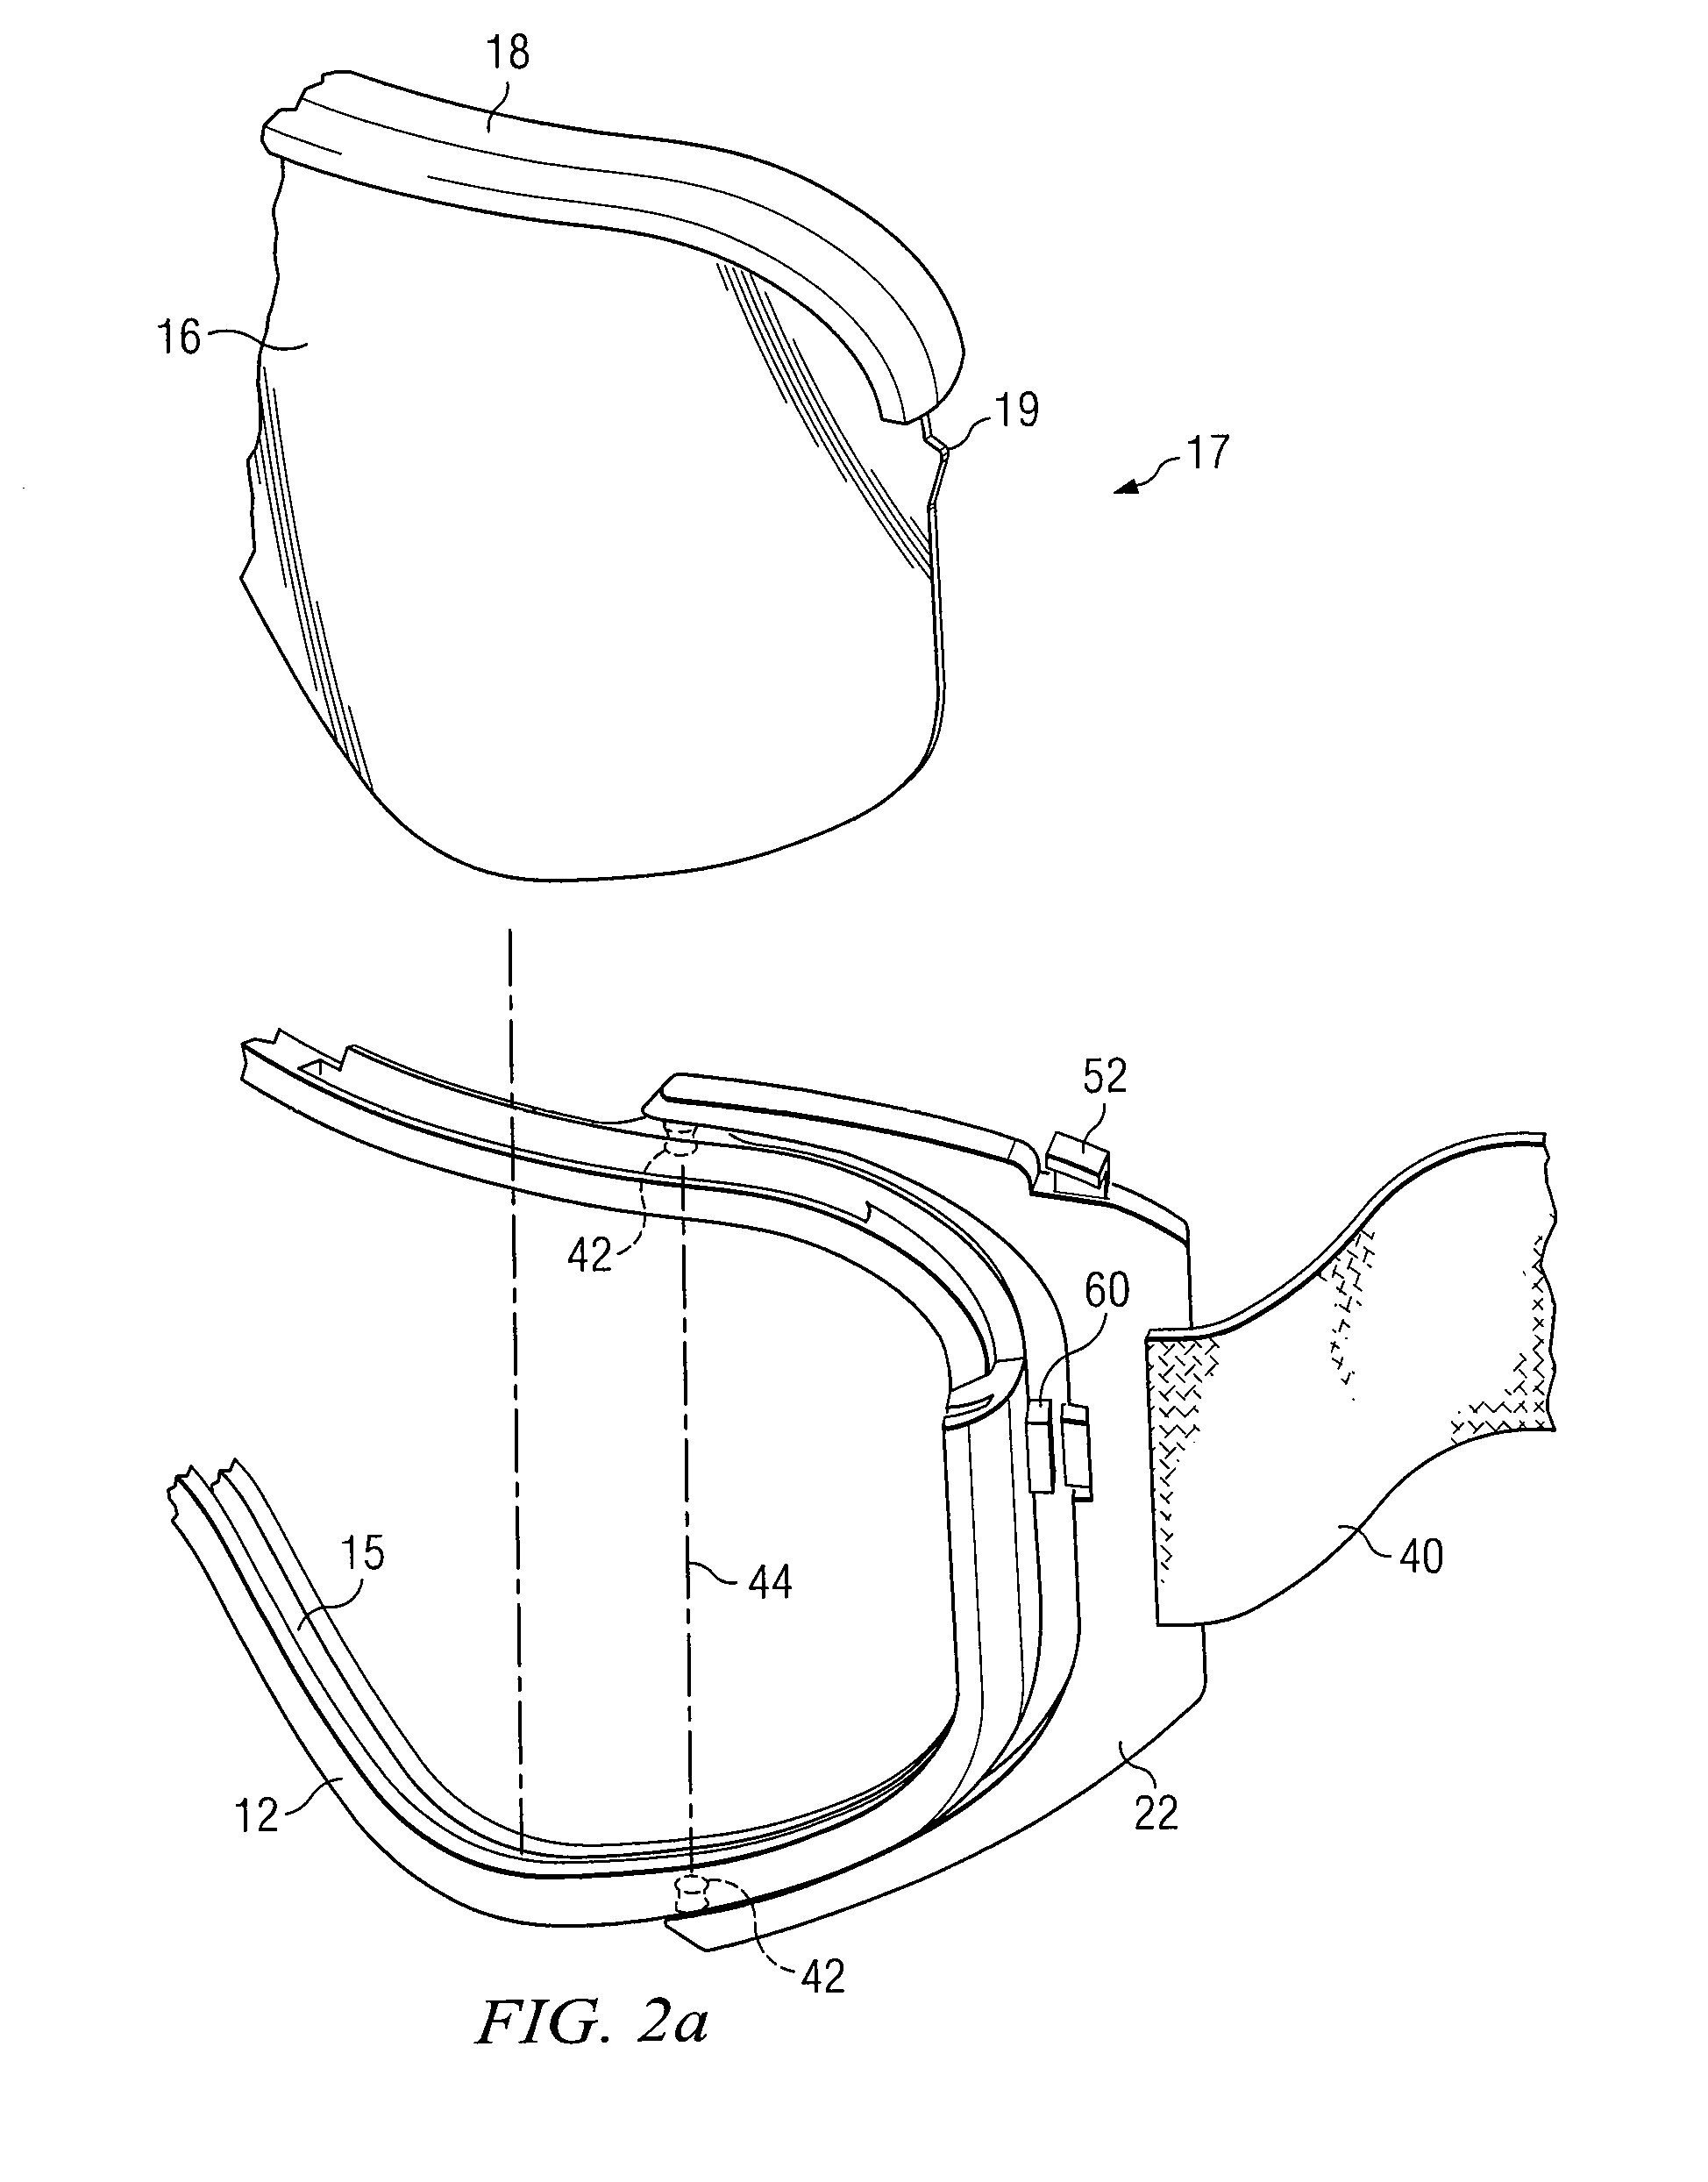 Lens replacement system